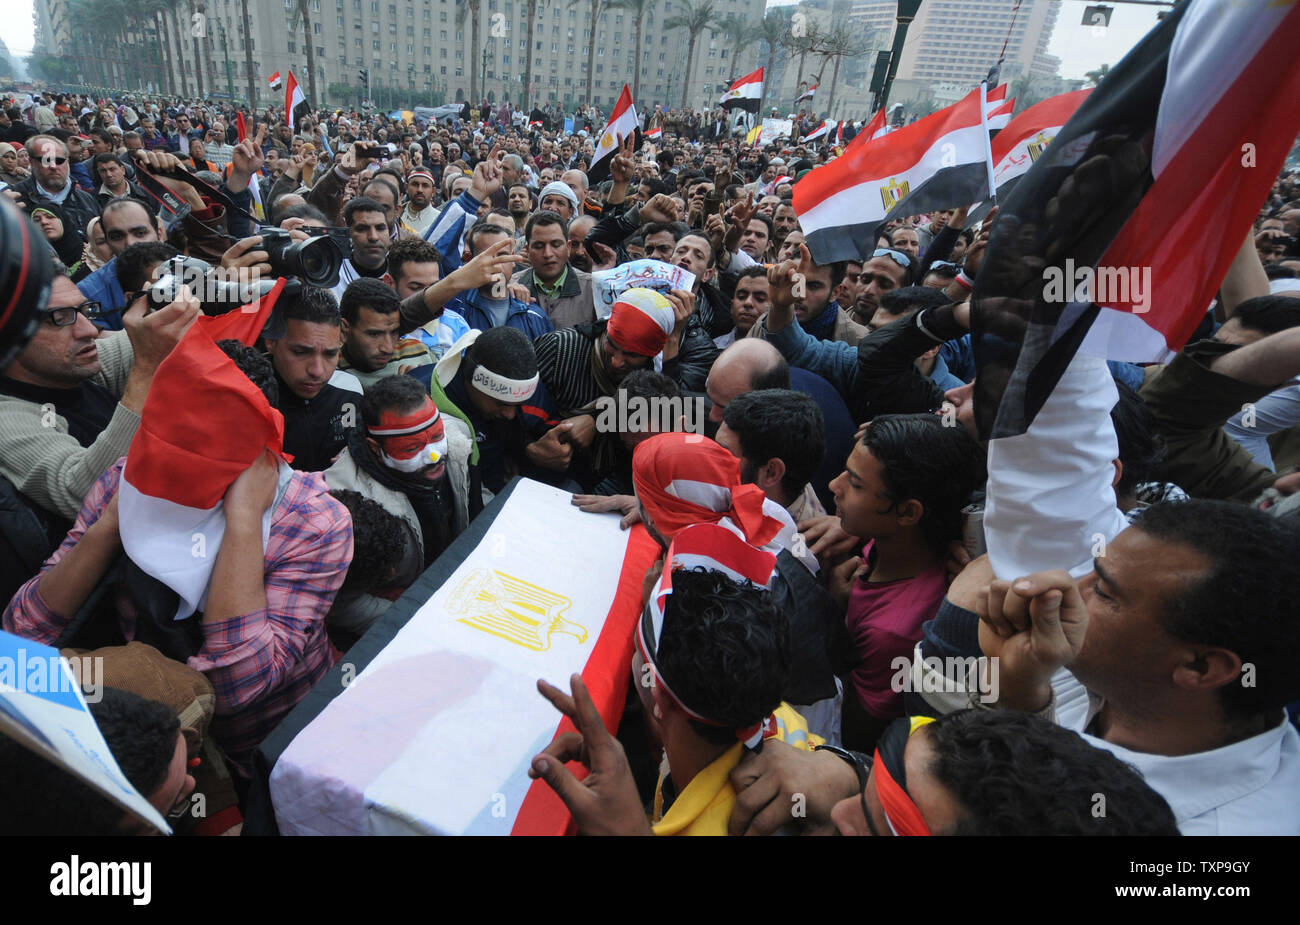 Egyptian anti-government demonstrators hold a symbolic funeral for colleague Ahmed Mohammed Mahmud , killed during clashes with pro-government supporters on February 4, at Cairo's Tahrir Square on February 7, 2011 on the 14th day of protests calling for the ouster of President Hosni Mubarak. UPI Stock Photo